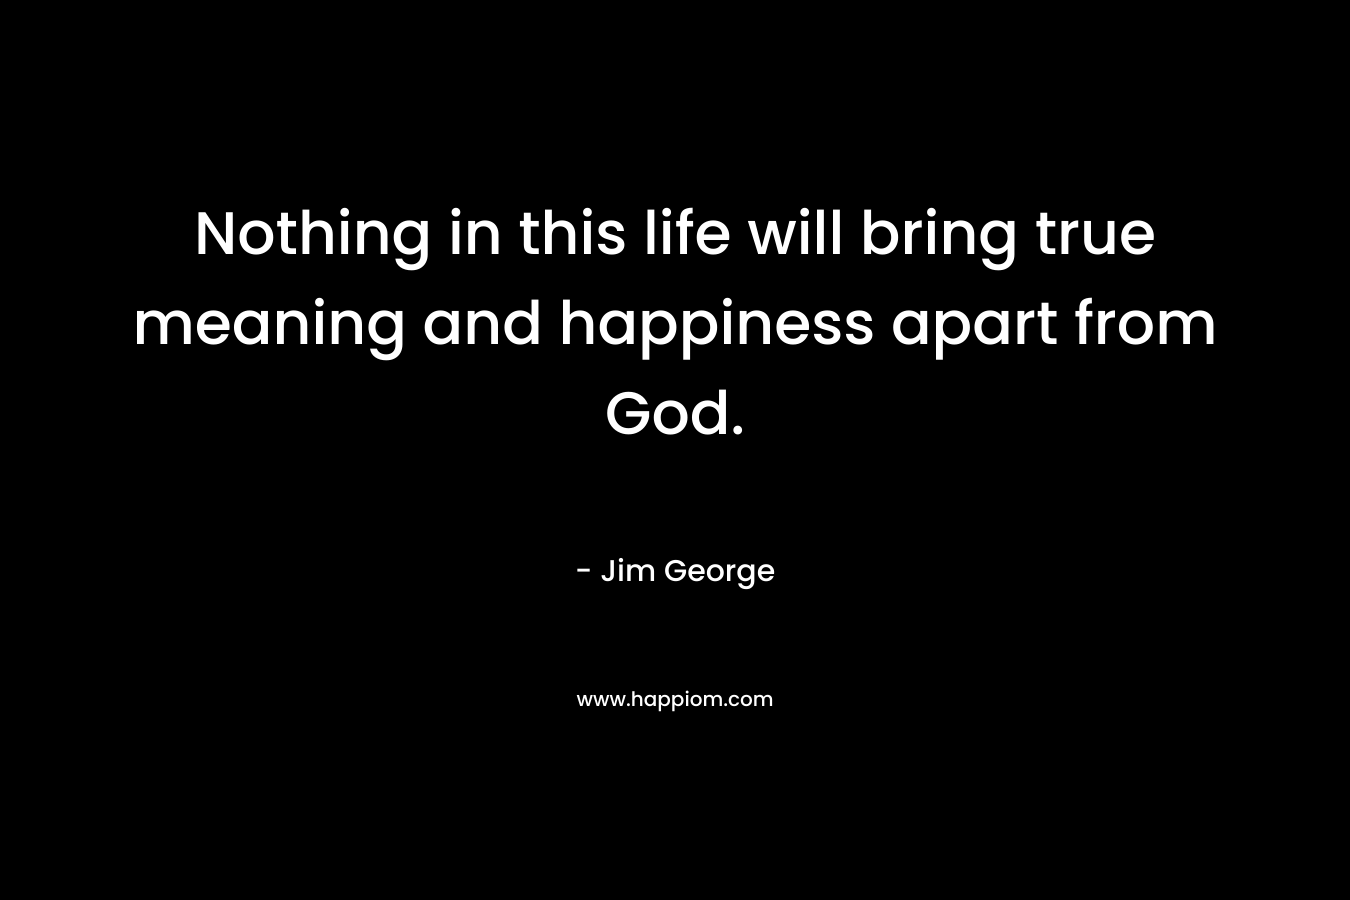 Nothing in this life will bring true meaning and happiness apart from God.